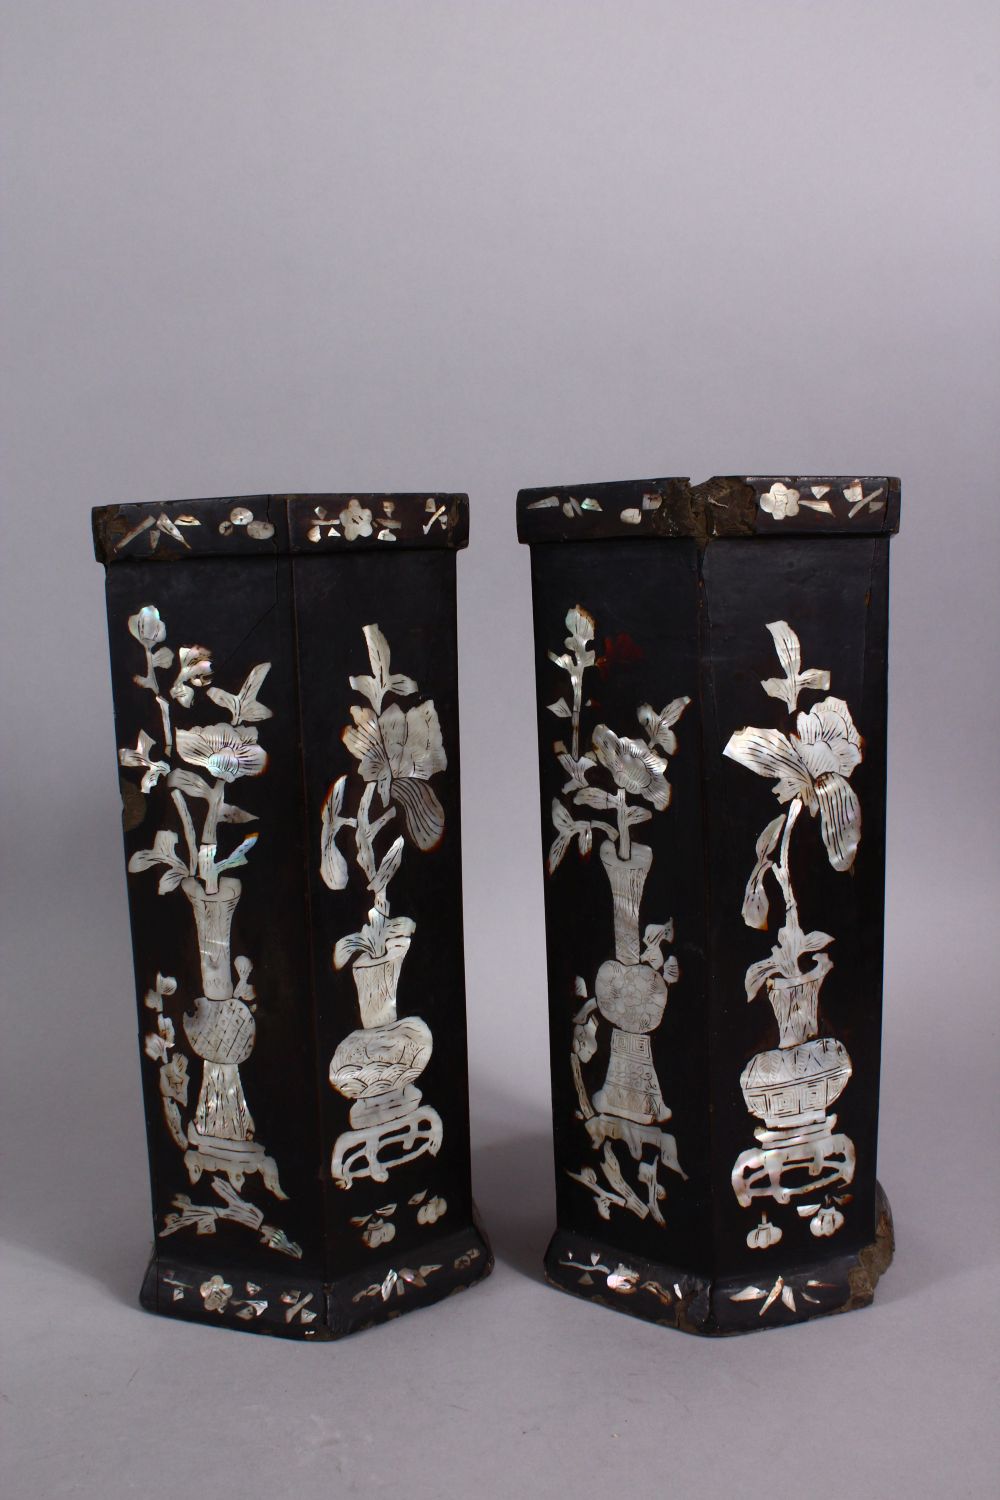 A PAIR OF 19TH CENTURY CHINESE HEXAGONAL CARVED WOODEN INLAID MOTHER OF PEARL VASES, inlaid with - Image 2 of 5